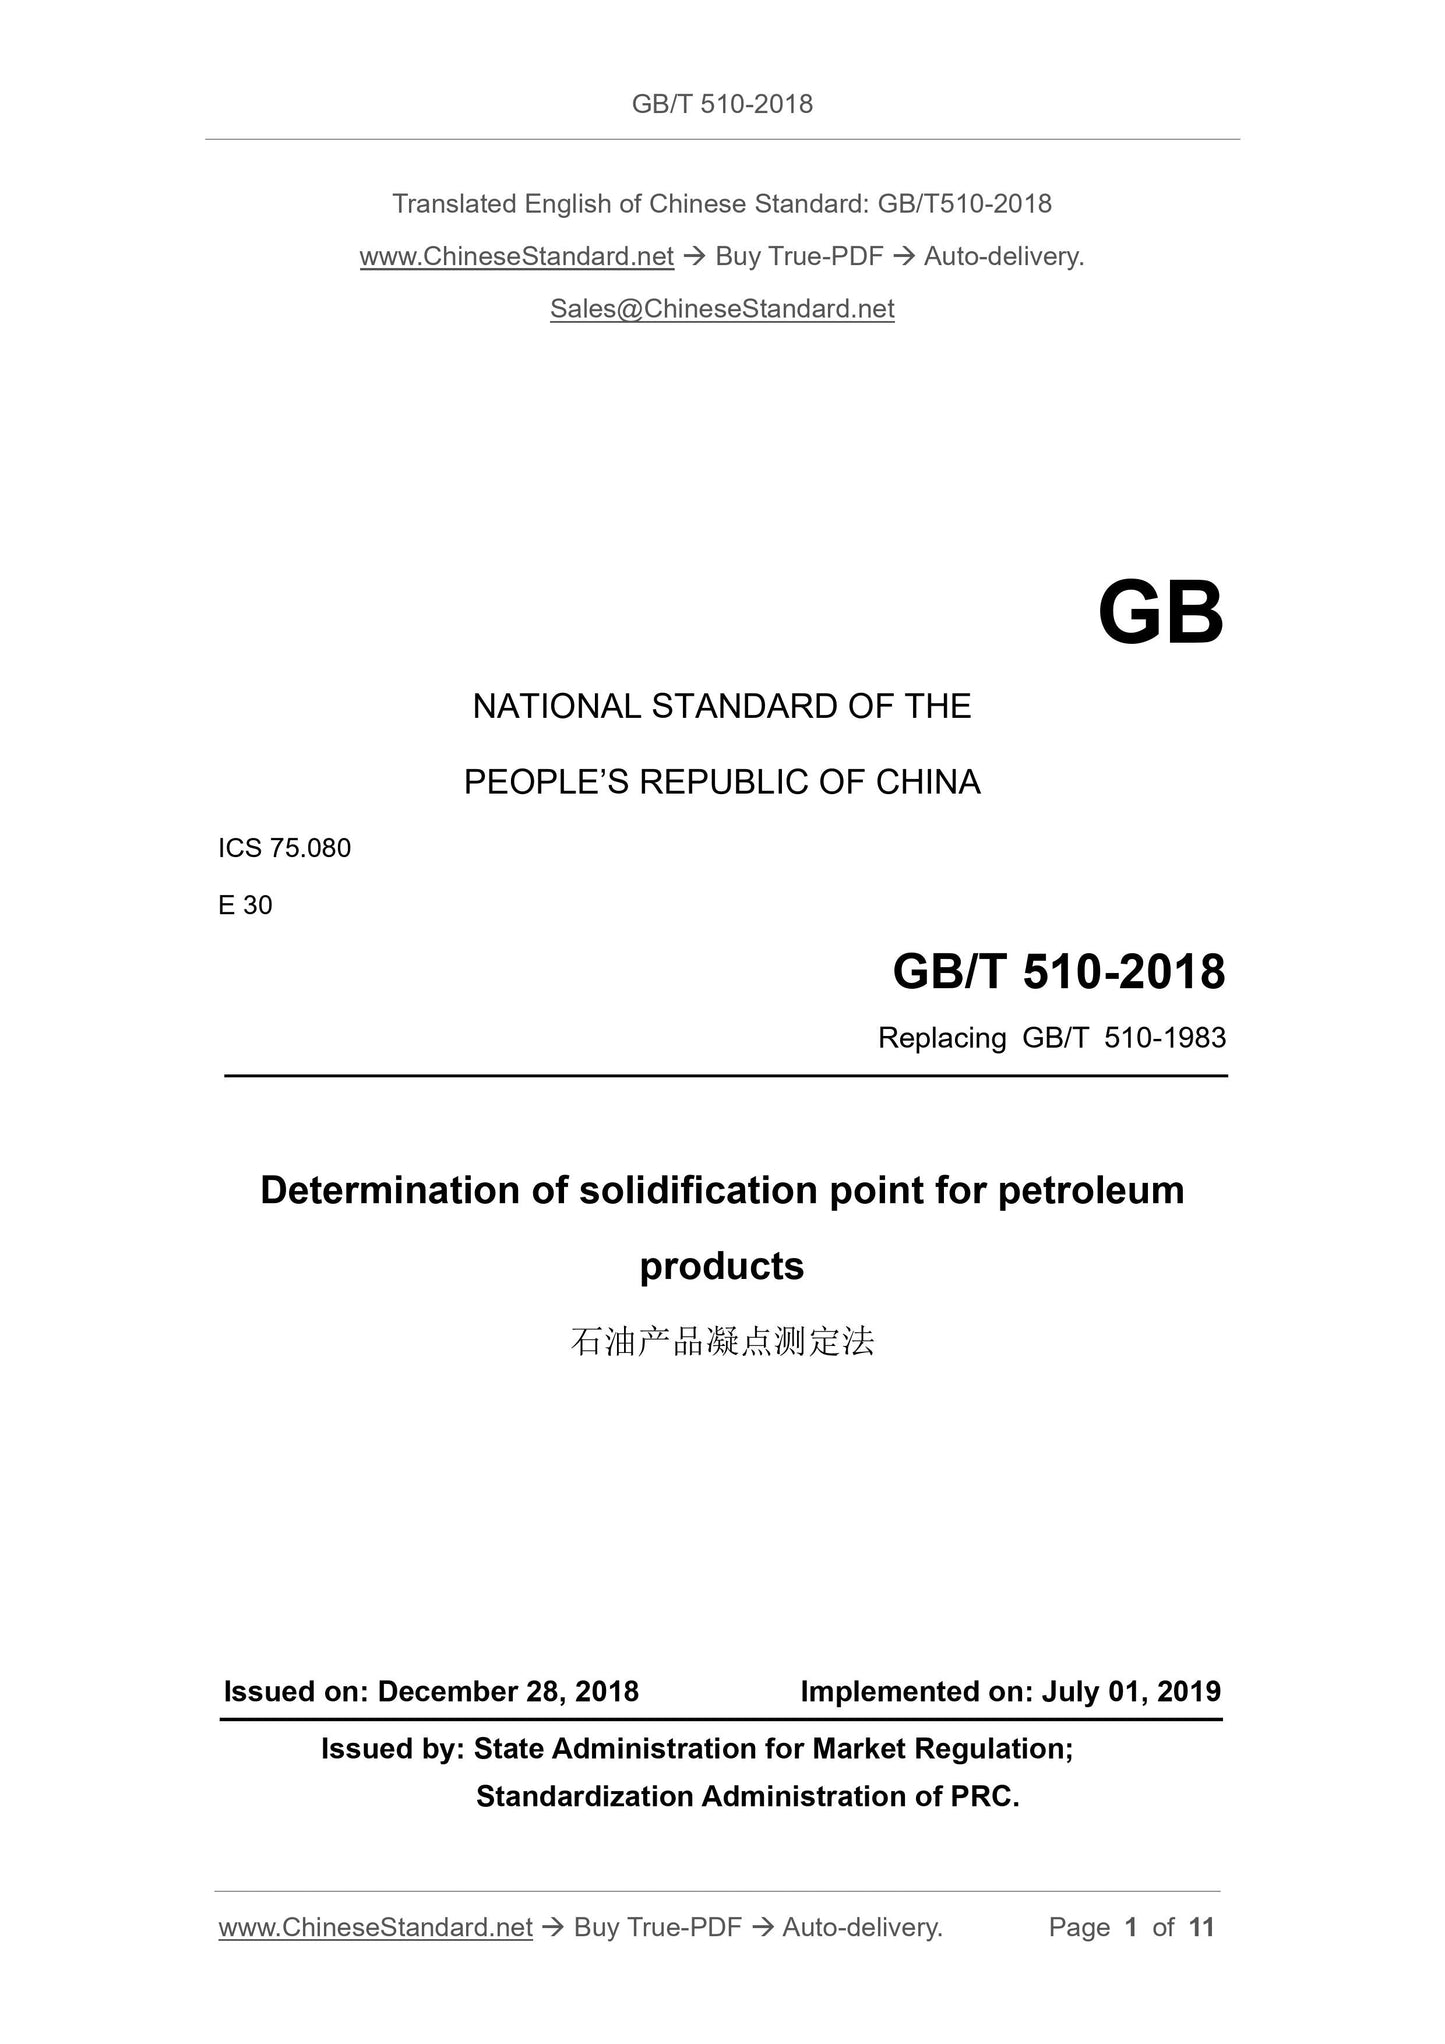 GB/T 510-2018 Page 1